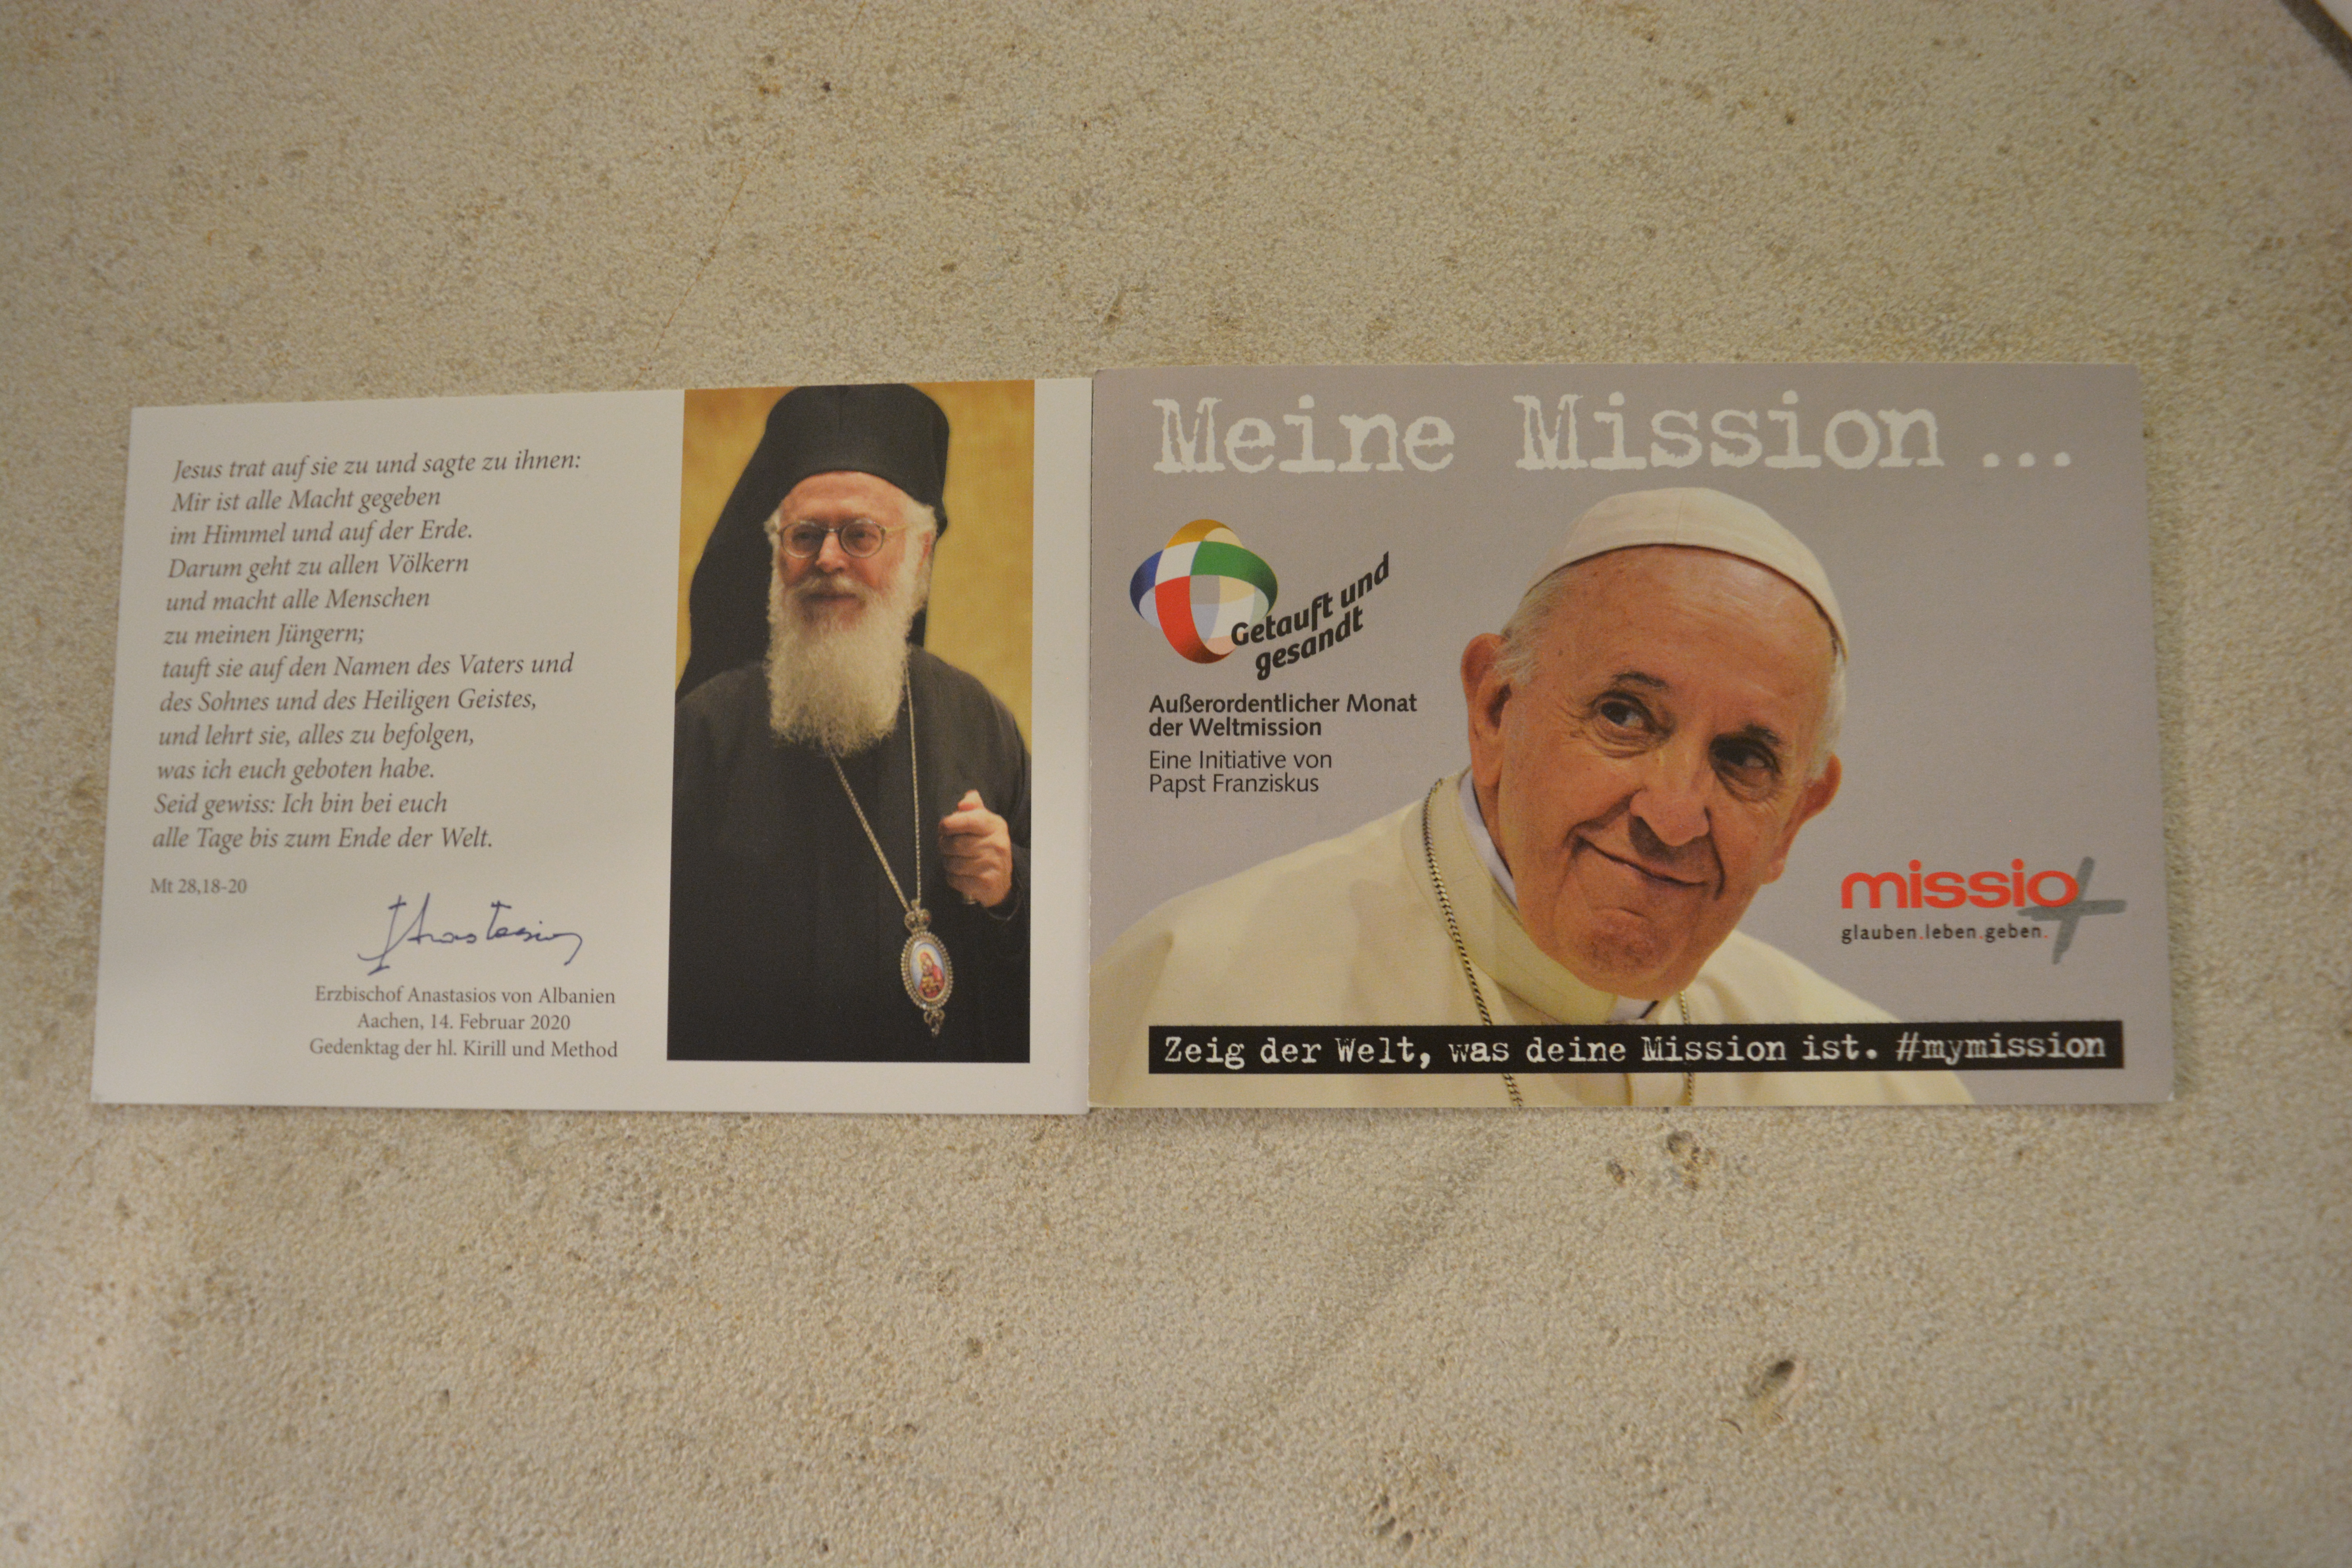 A common mission - Archbishop Anastasios and Pope Francis